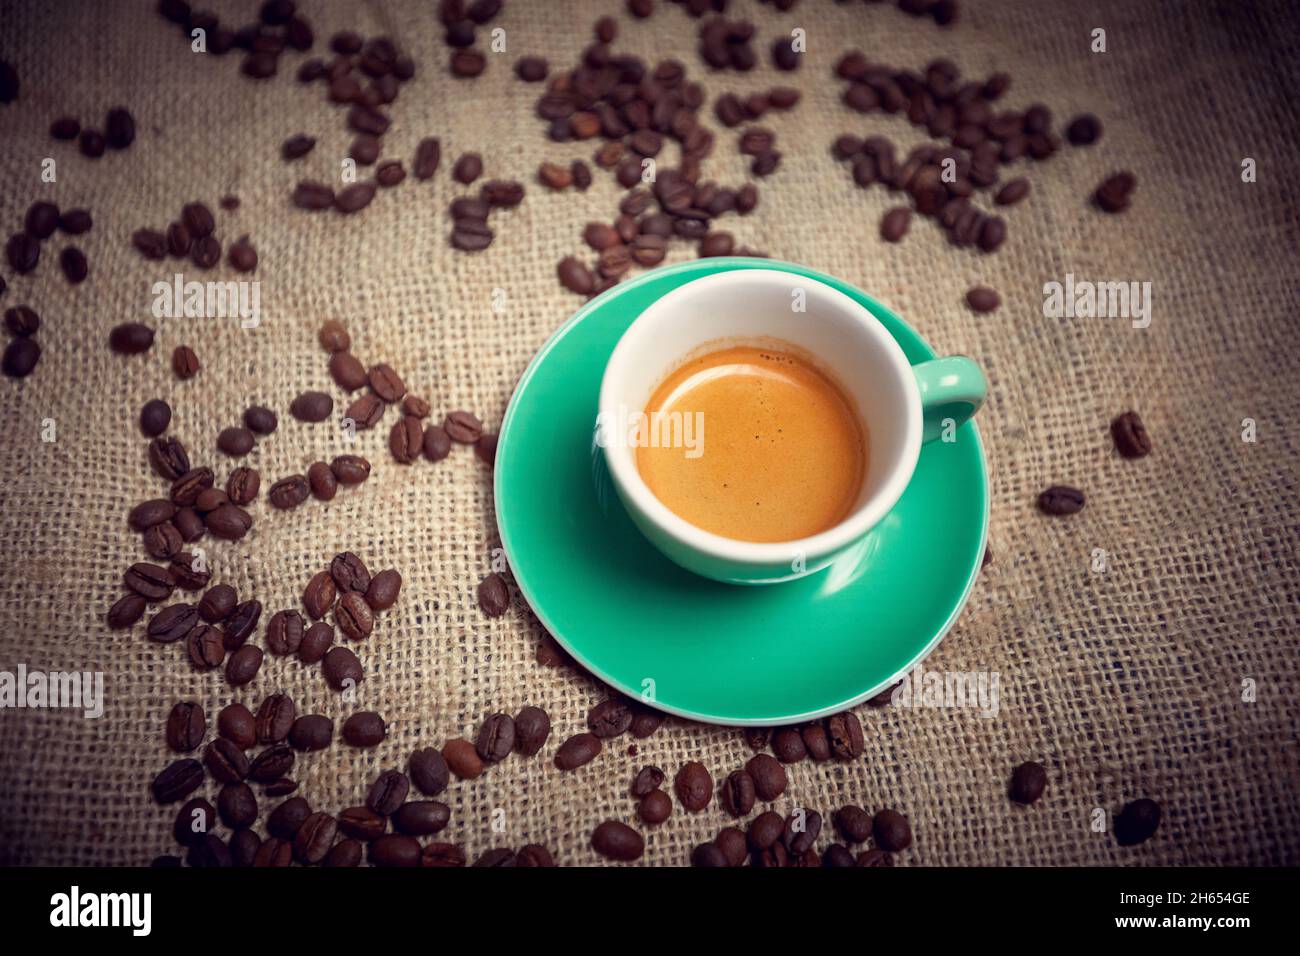 Close-up of aromatic and fragrant espresso coffee in a cup standing on a bag with coffee beans. Coffee, beverage Stock Photo